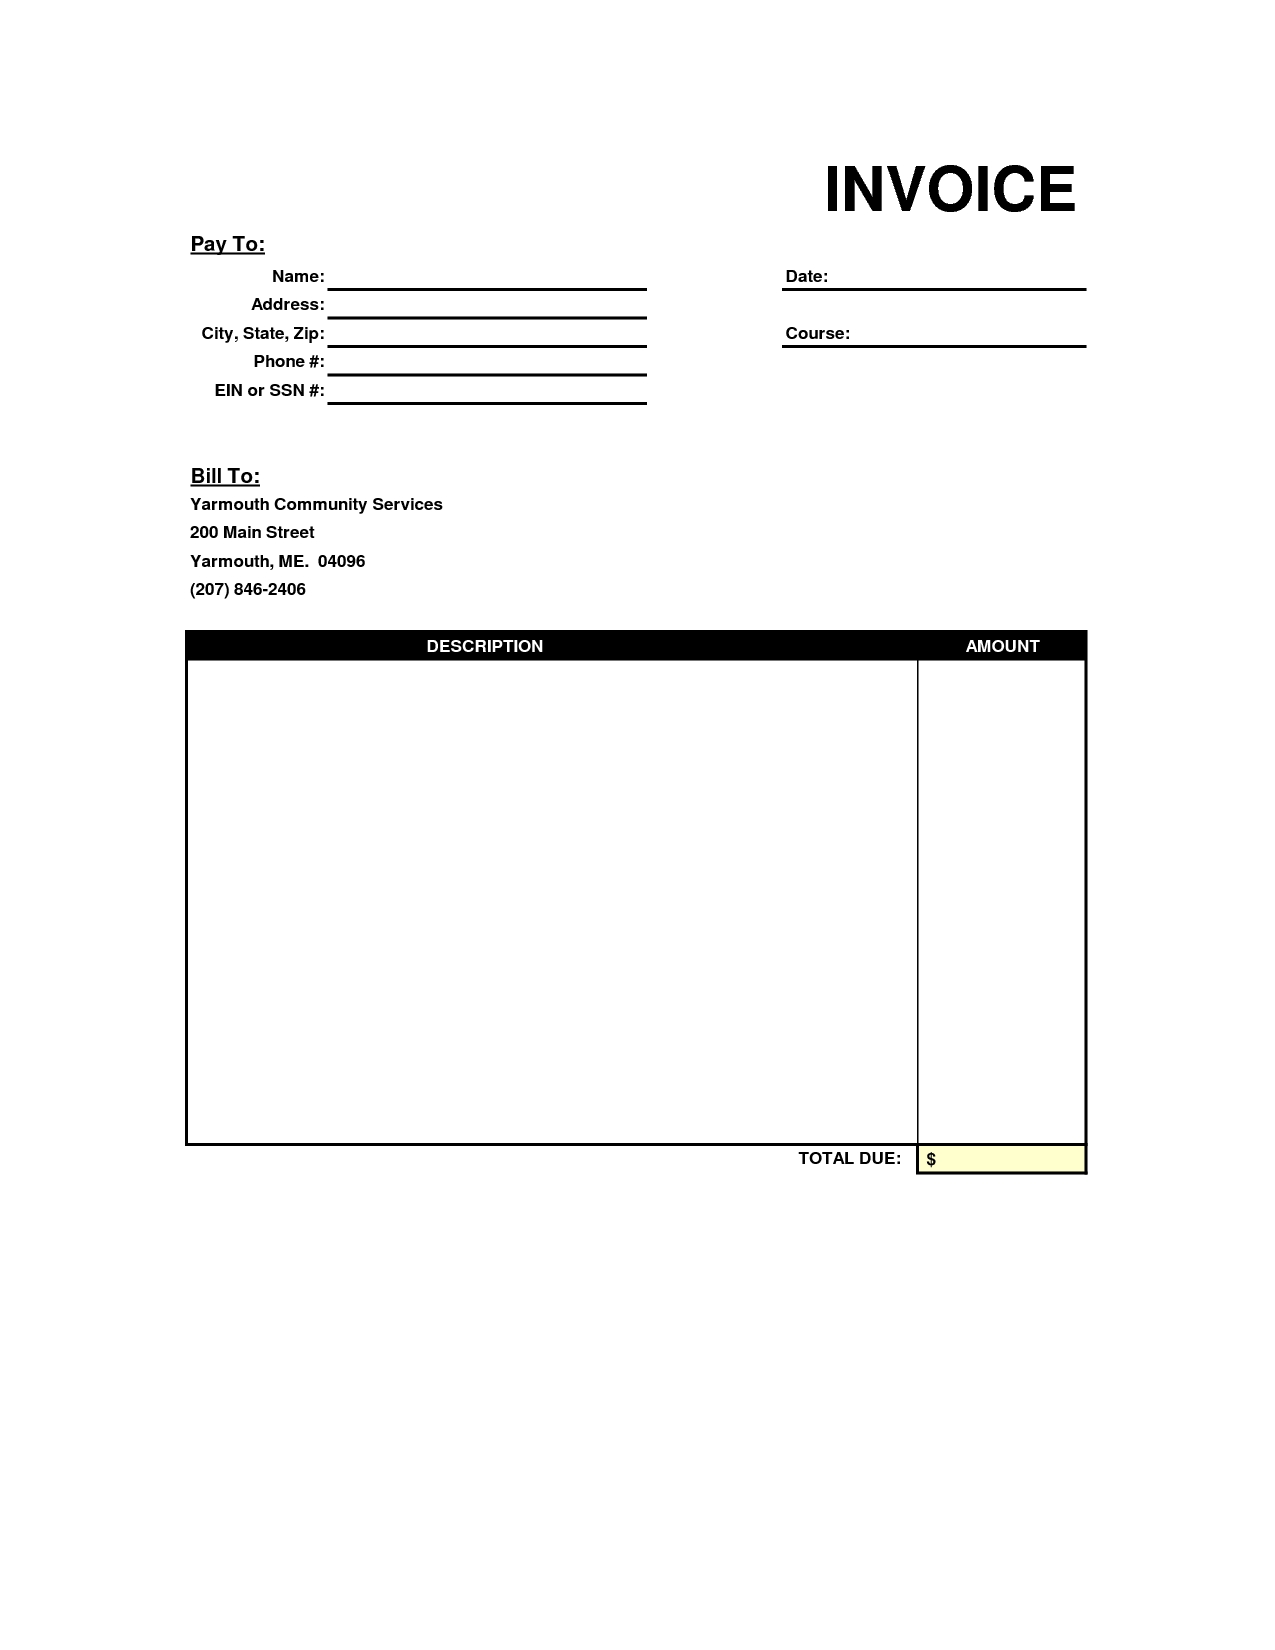 blank invoice excel printable invoice template blank invoice excel